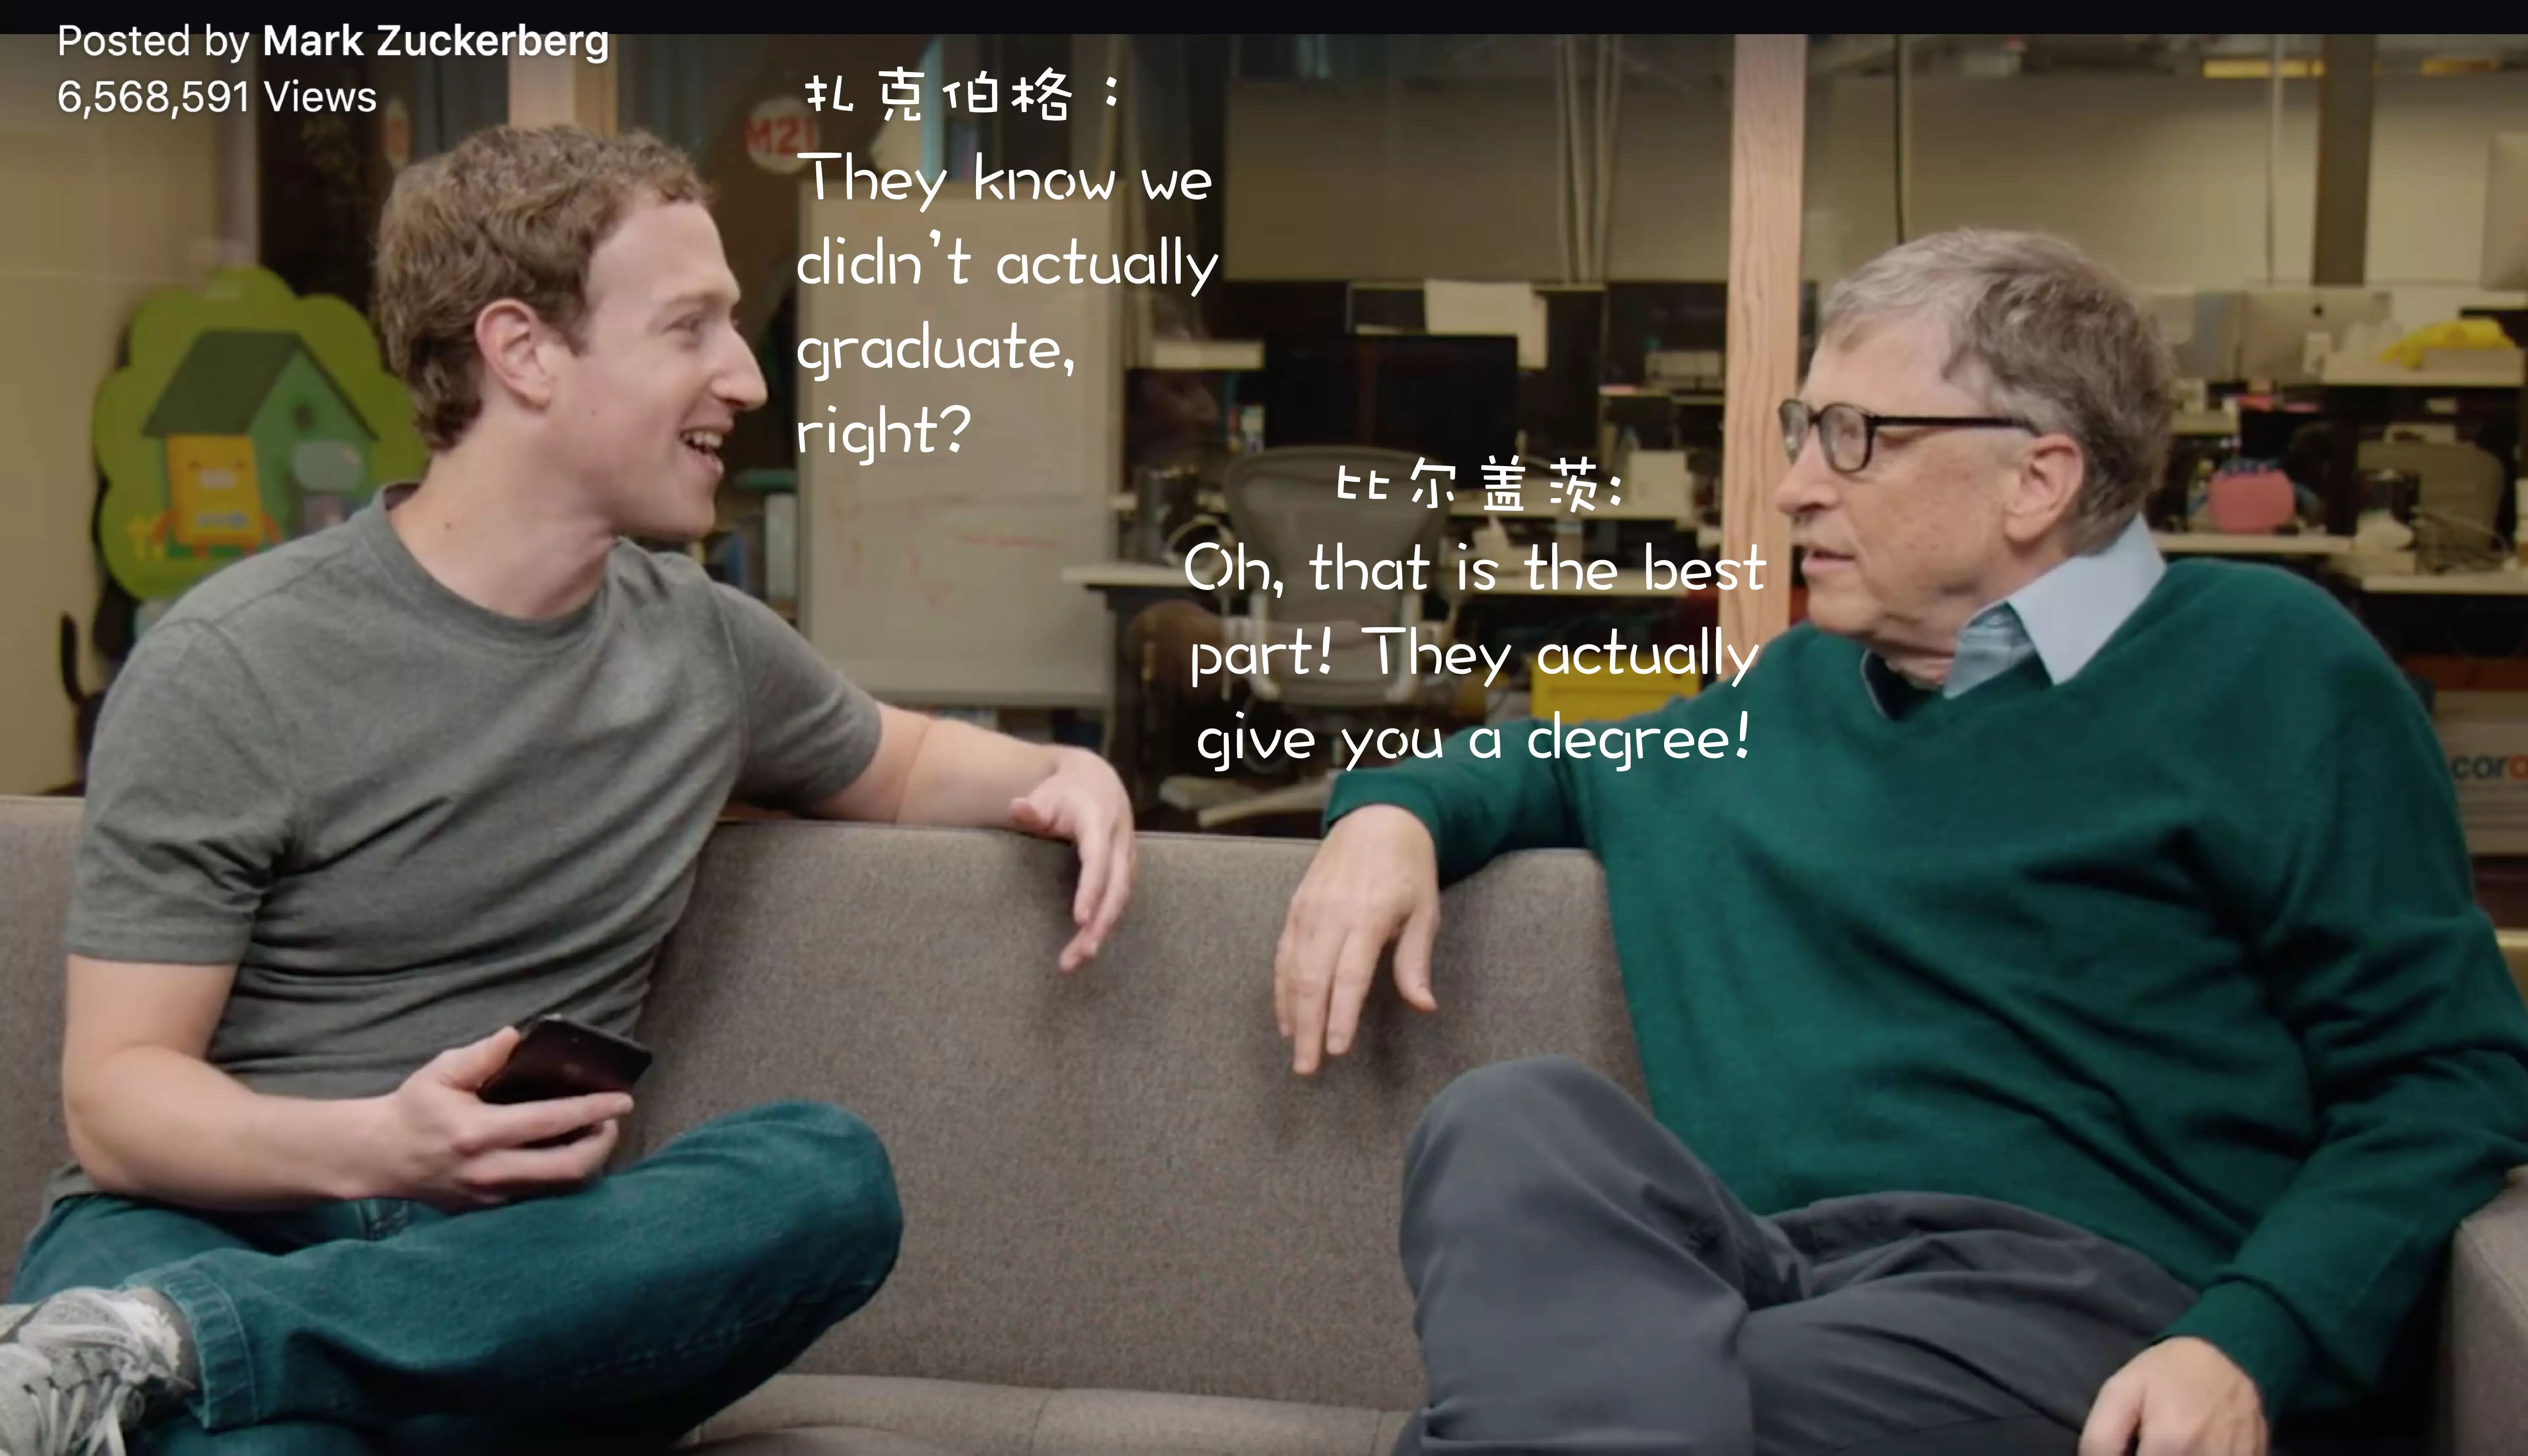 Bill Gates advises Zuckerberg not to wear underwear to go to Harvard as a guest?! The most important American graduation speech in 2017 is here